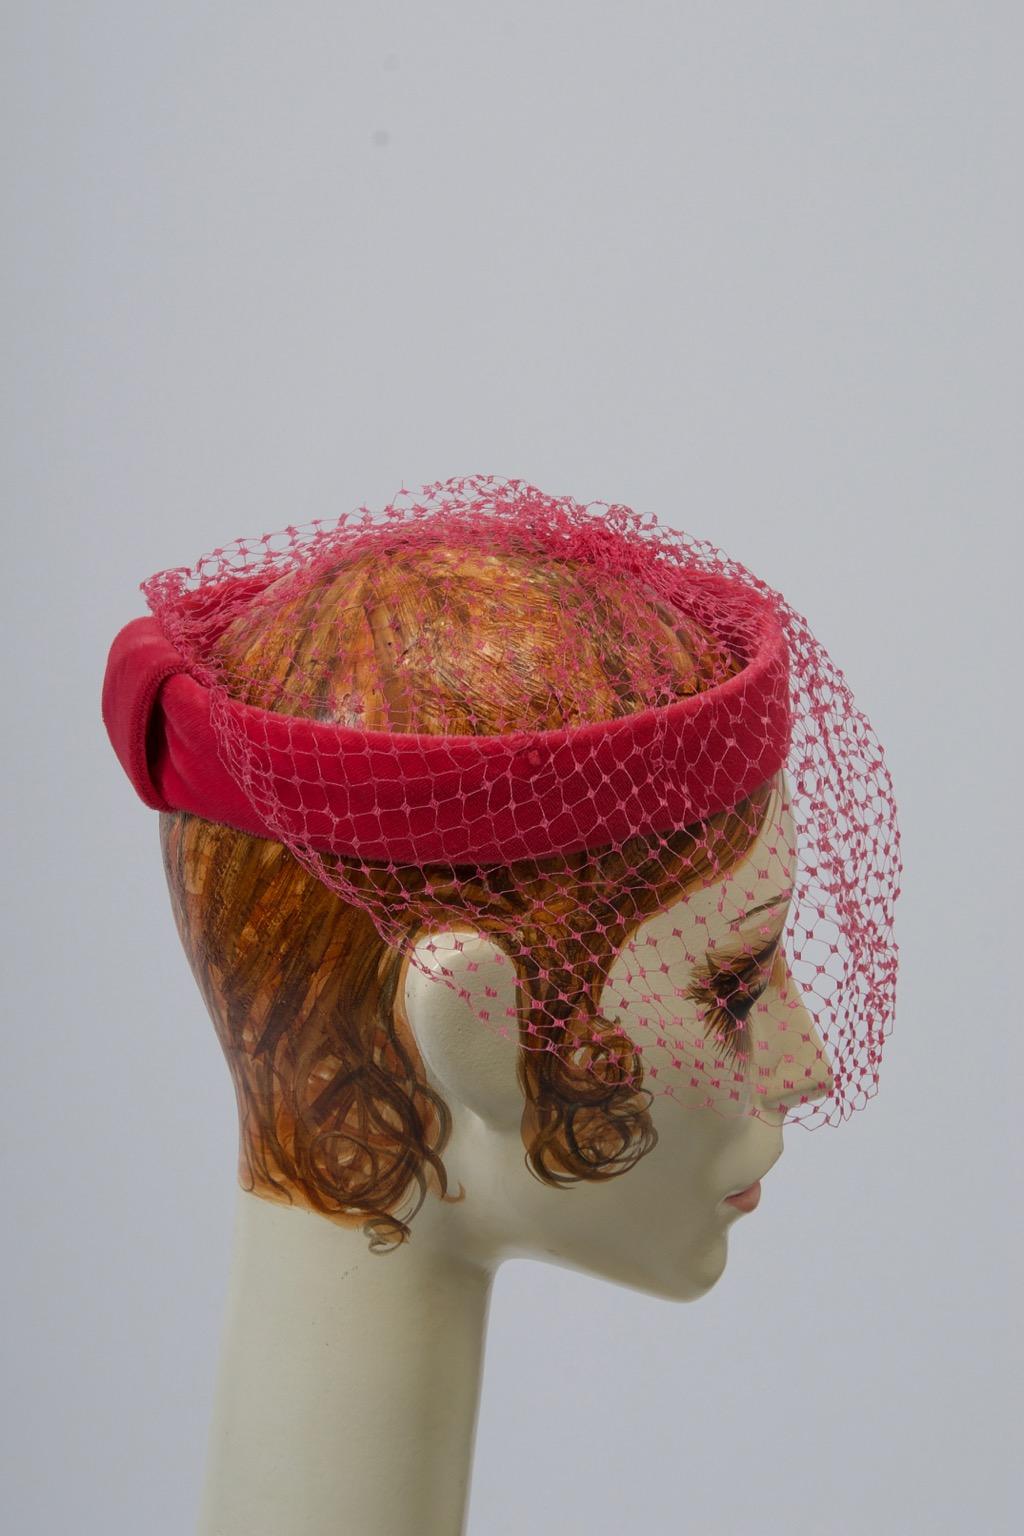 c.1960 fascinator consisting of a structured pink velvet ring under a coordinating deep net that extends from top of head down front and sides.
One size fits all.